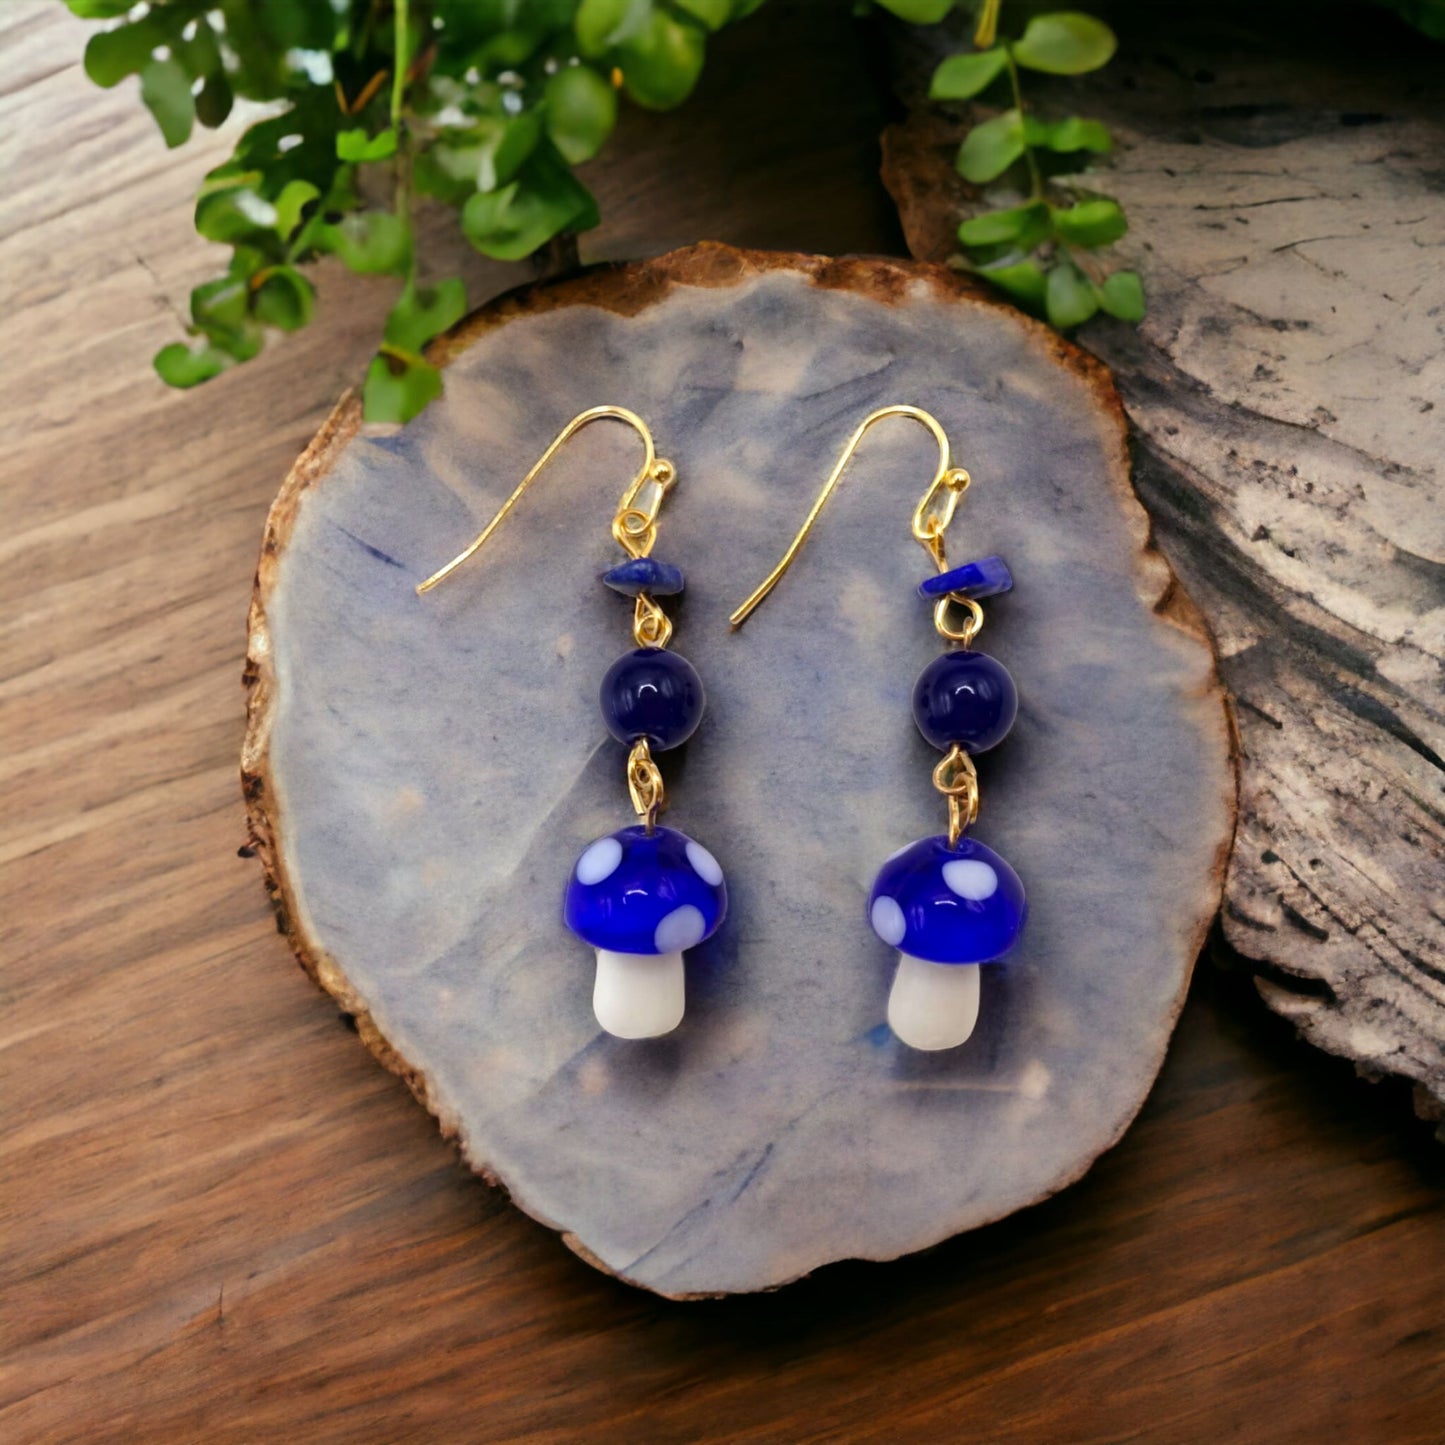 Sapphire Glass Mushroom Earrings from Confetti Kitty, Only 7.99